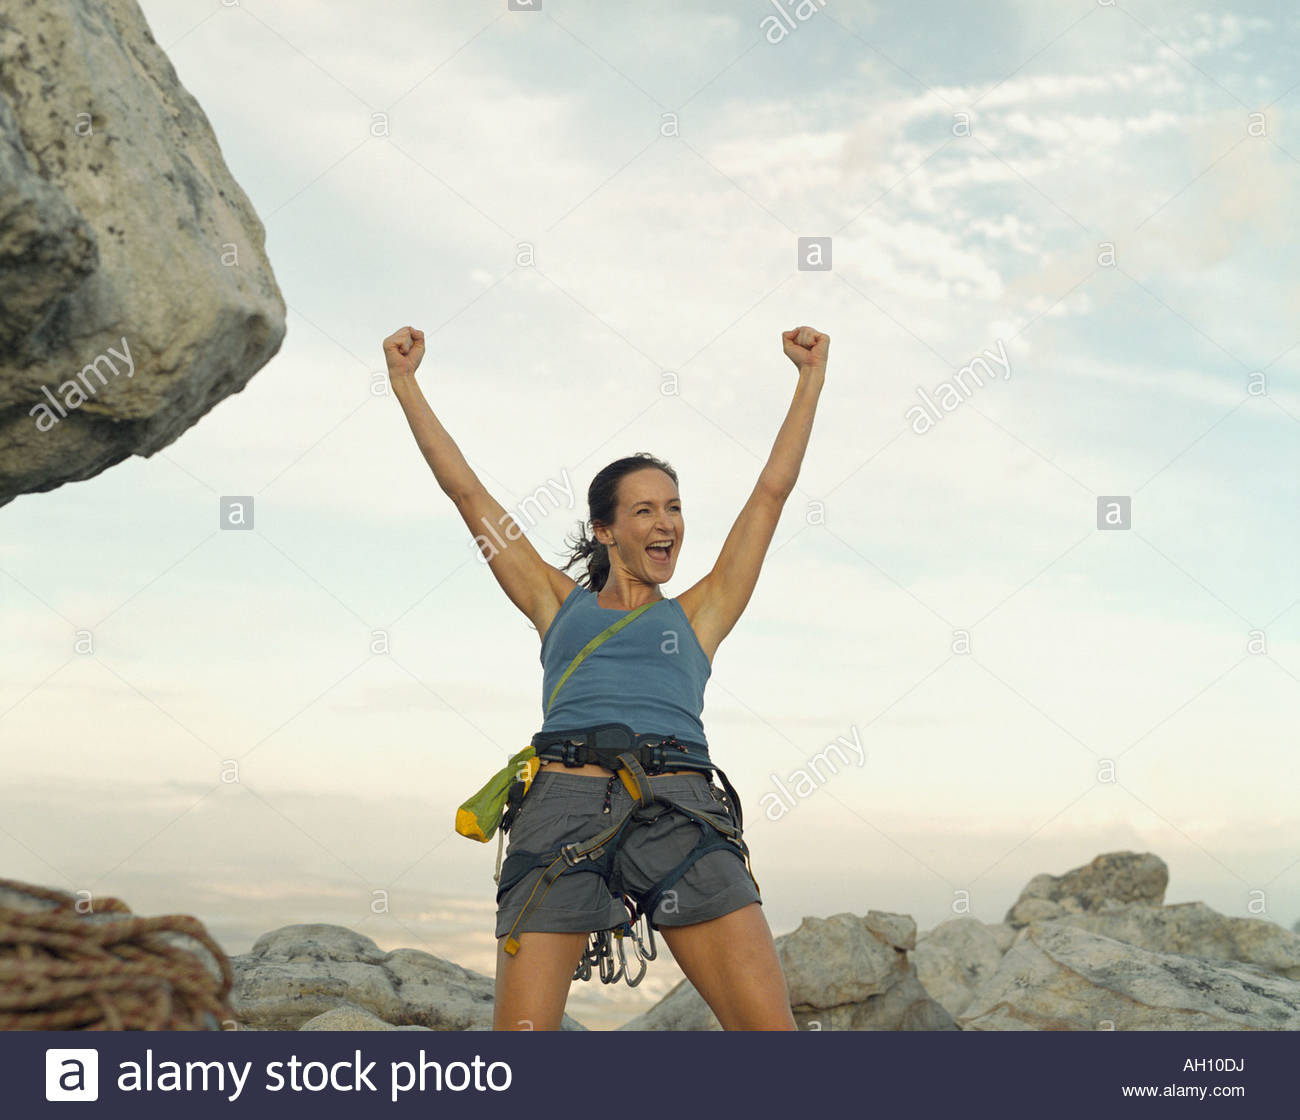 A woman climber at the top of a mountain victorious Stock Photo